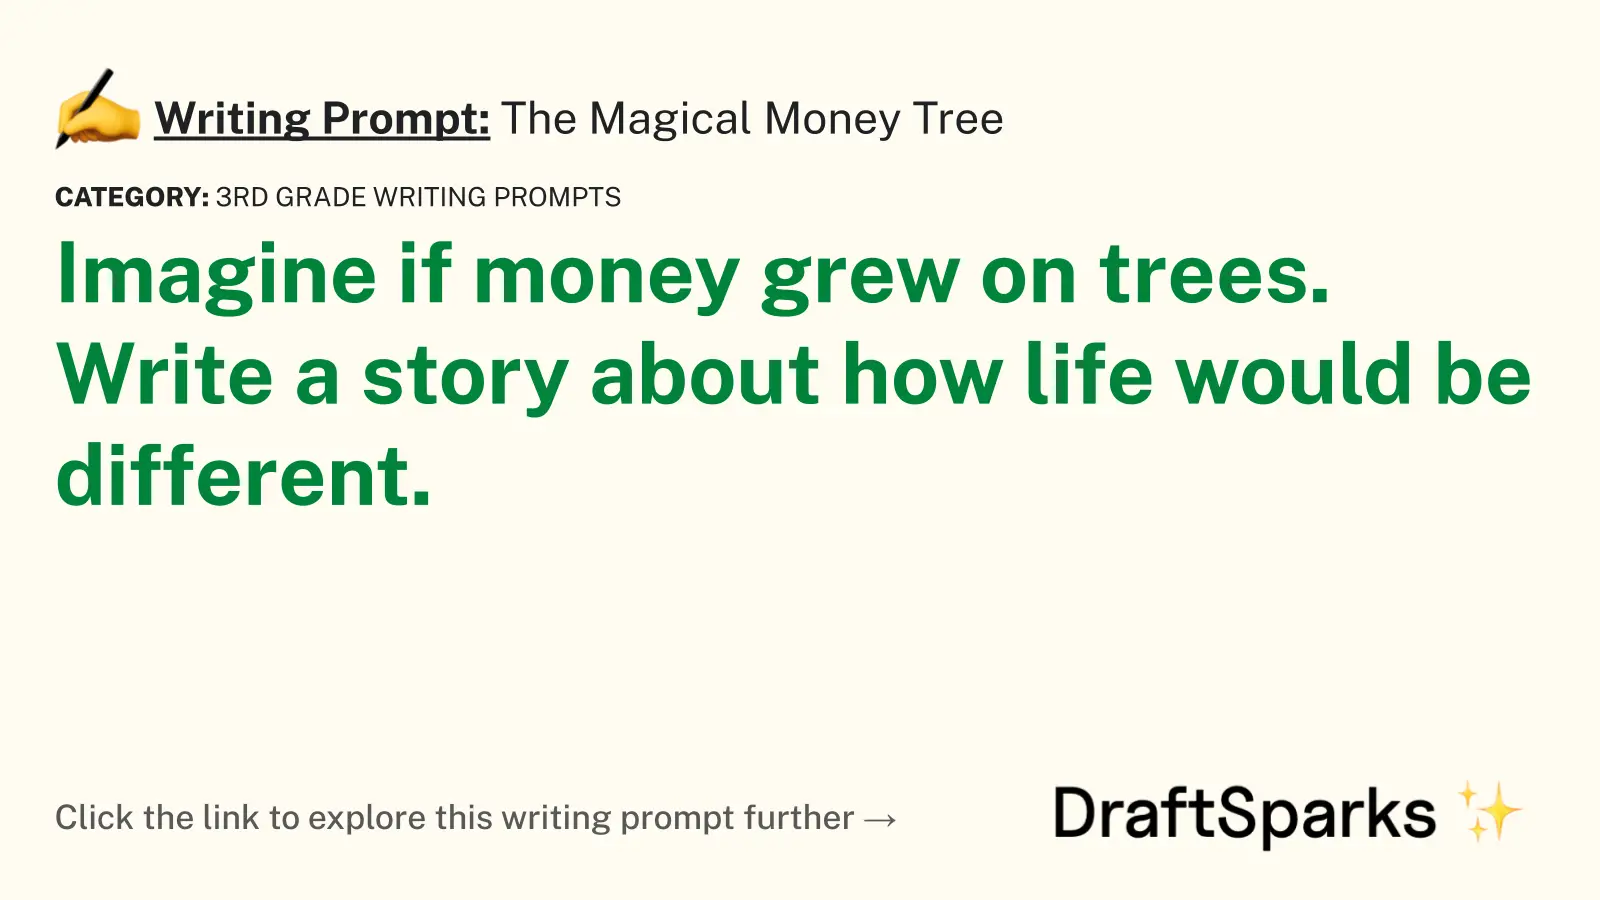 The Magical Money Tree